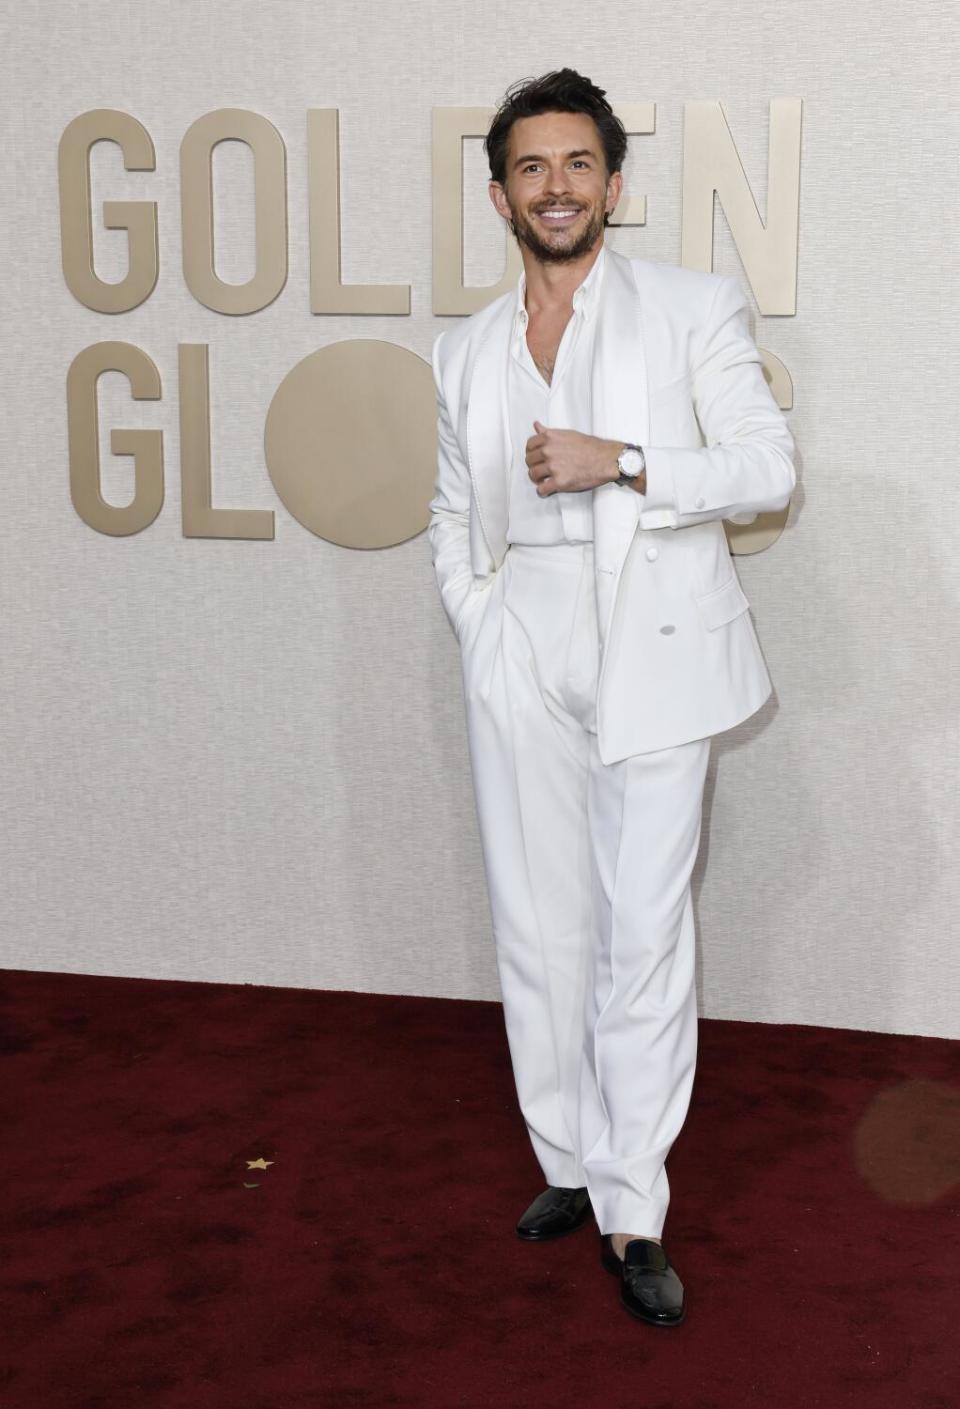 Jonathan Bailey on the red carpet of the 81st Golden Globe Awards